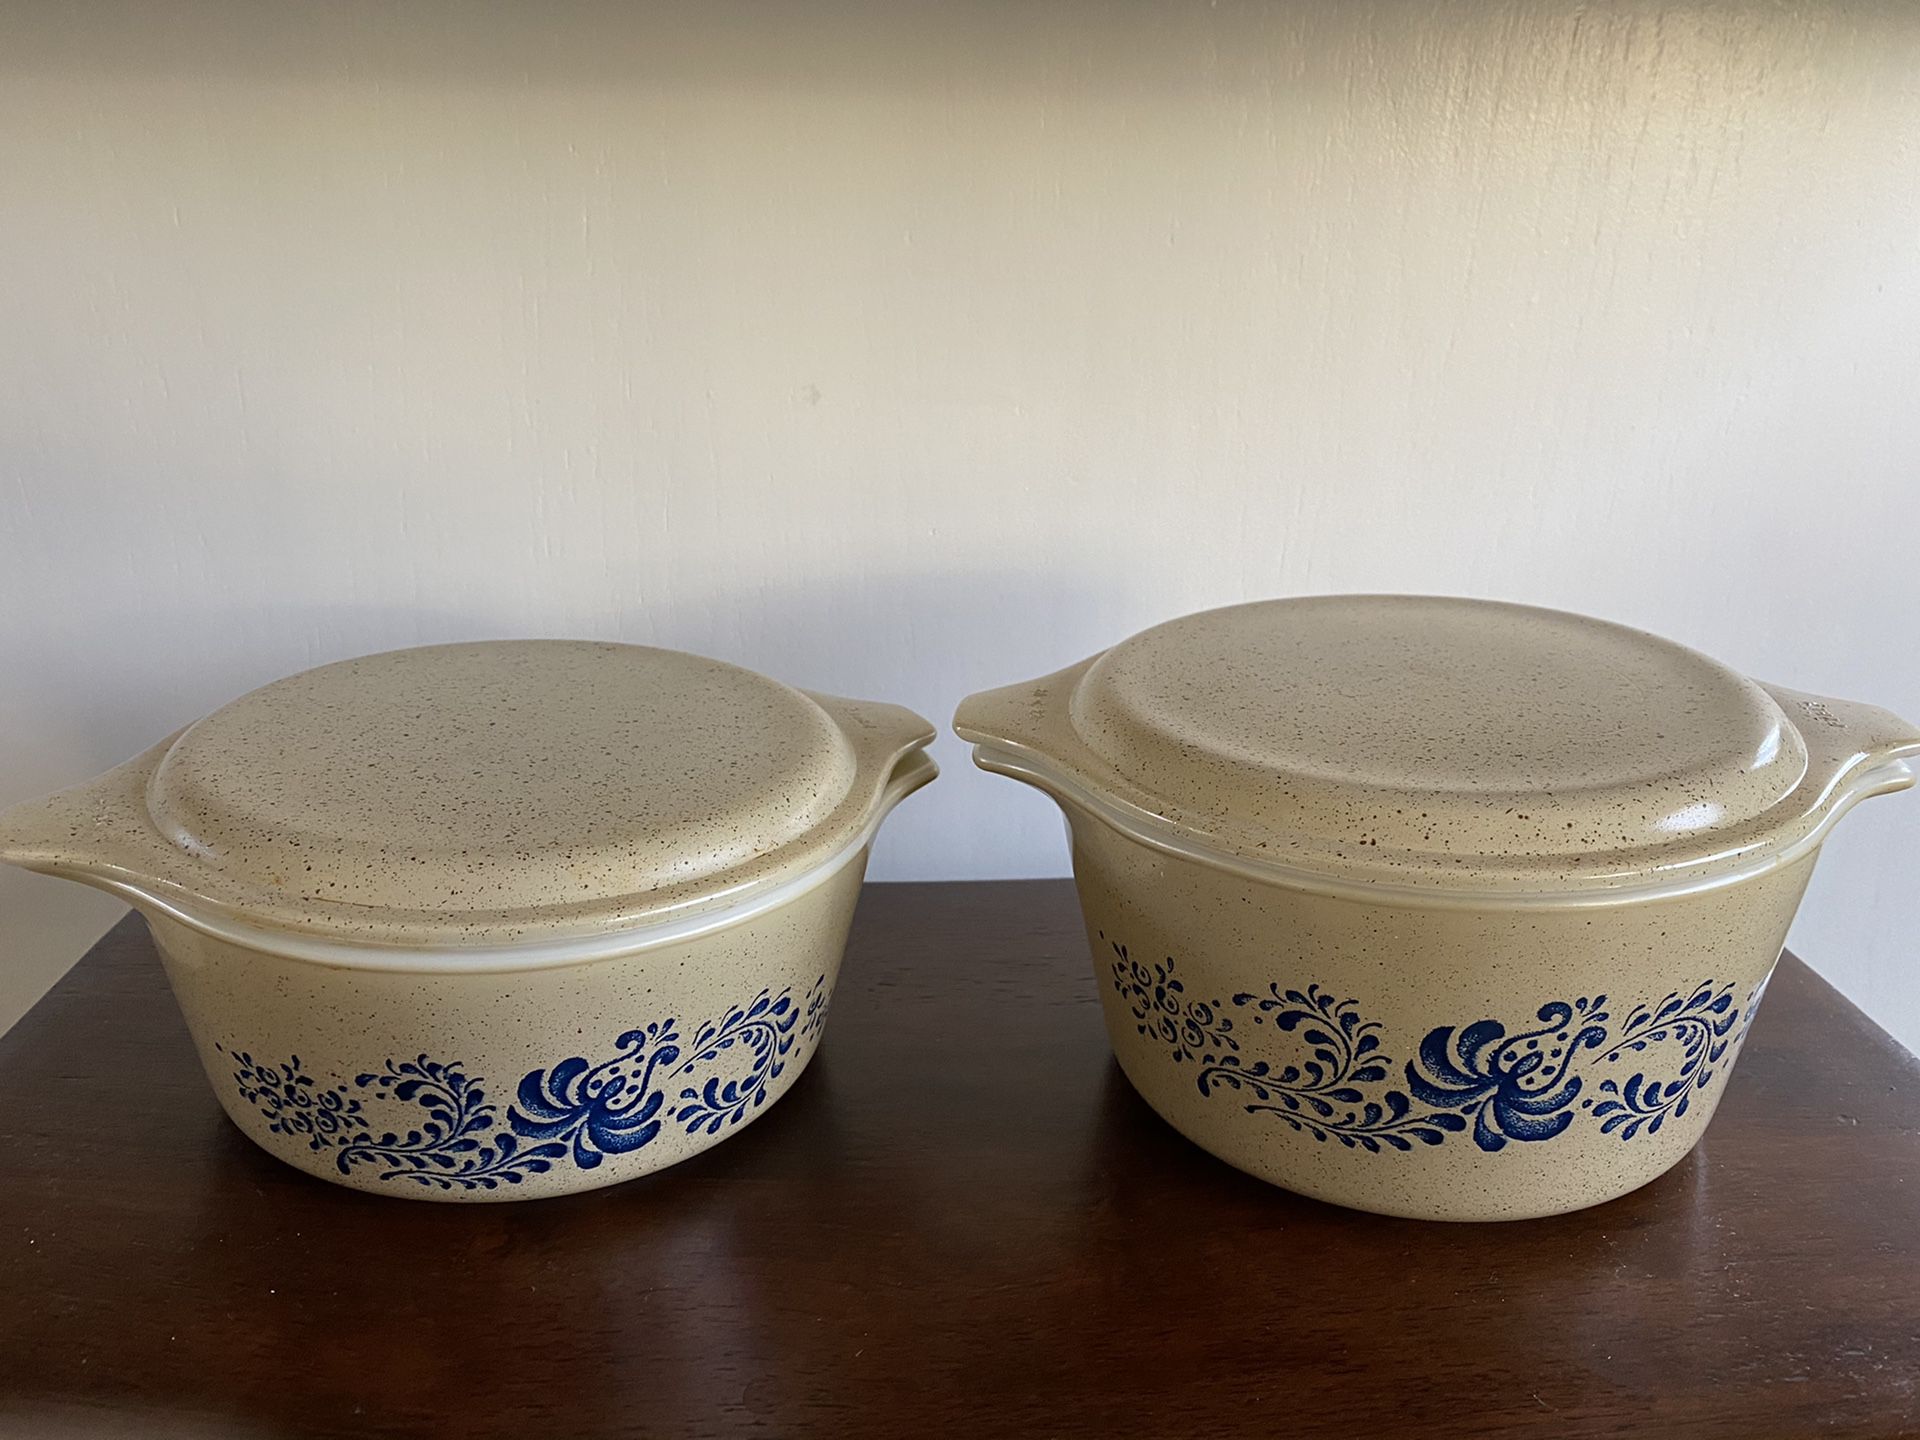 Homestead Pyrex Dishes